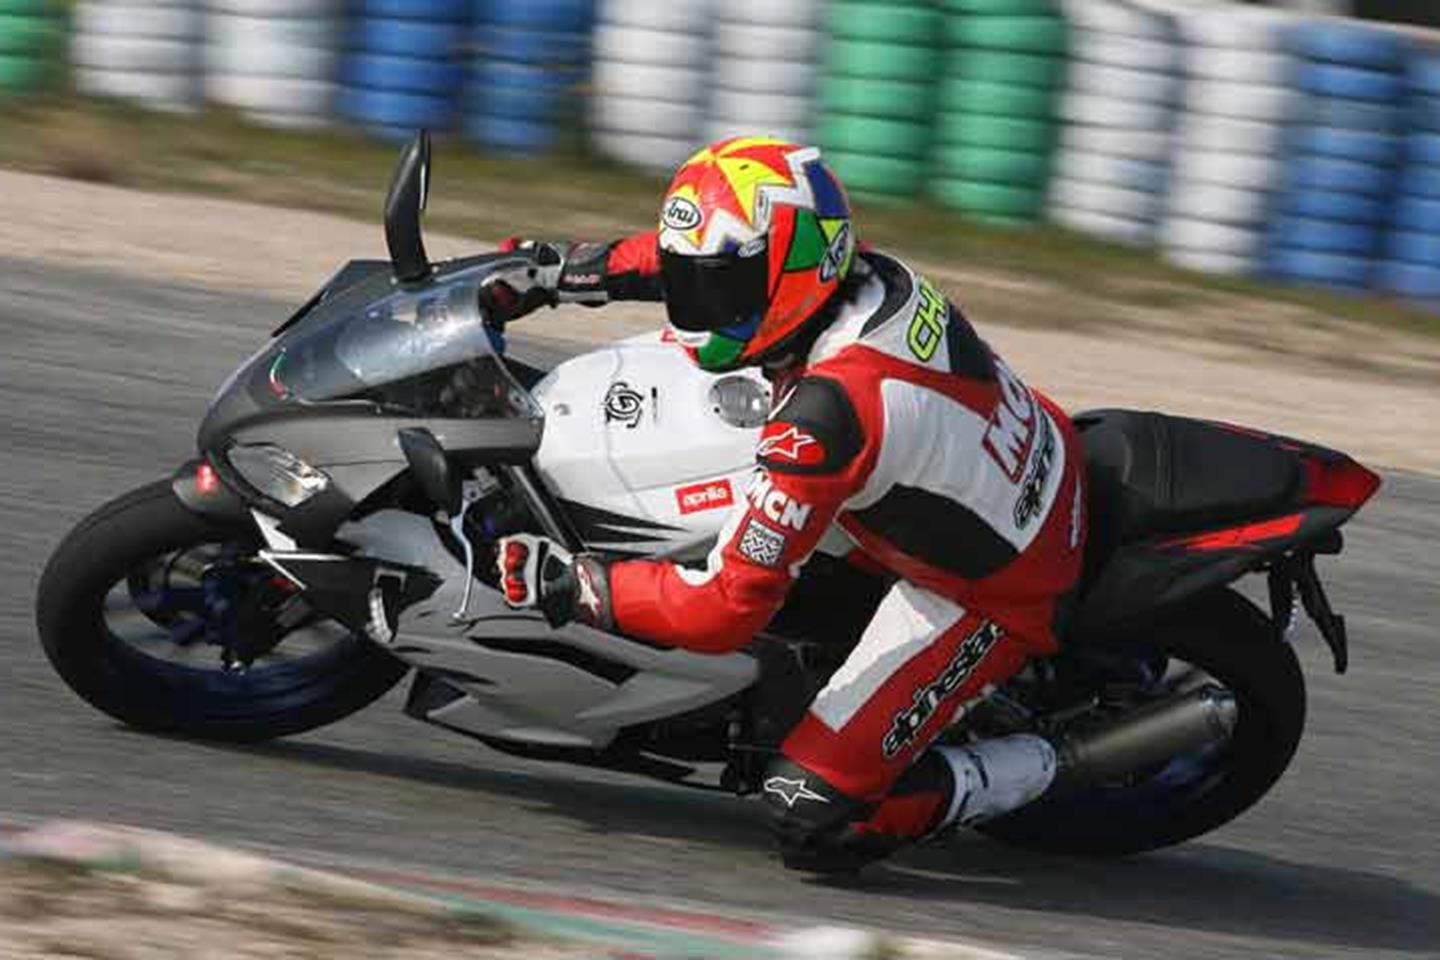 Aprilia RS125 ridden on track with knee down. What a great 125